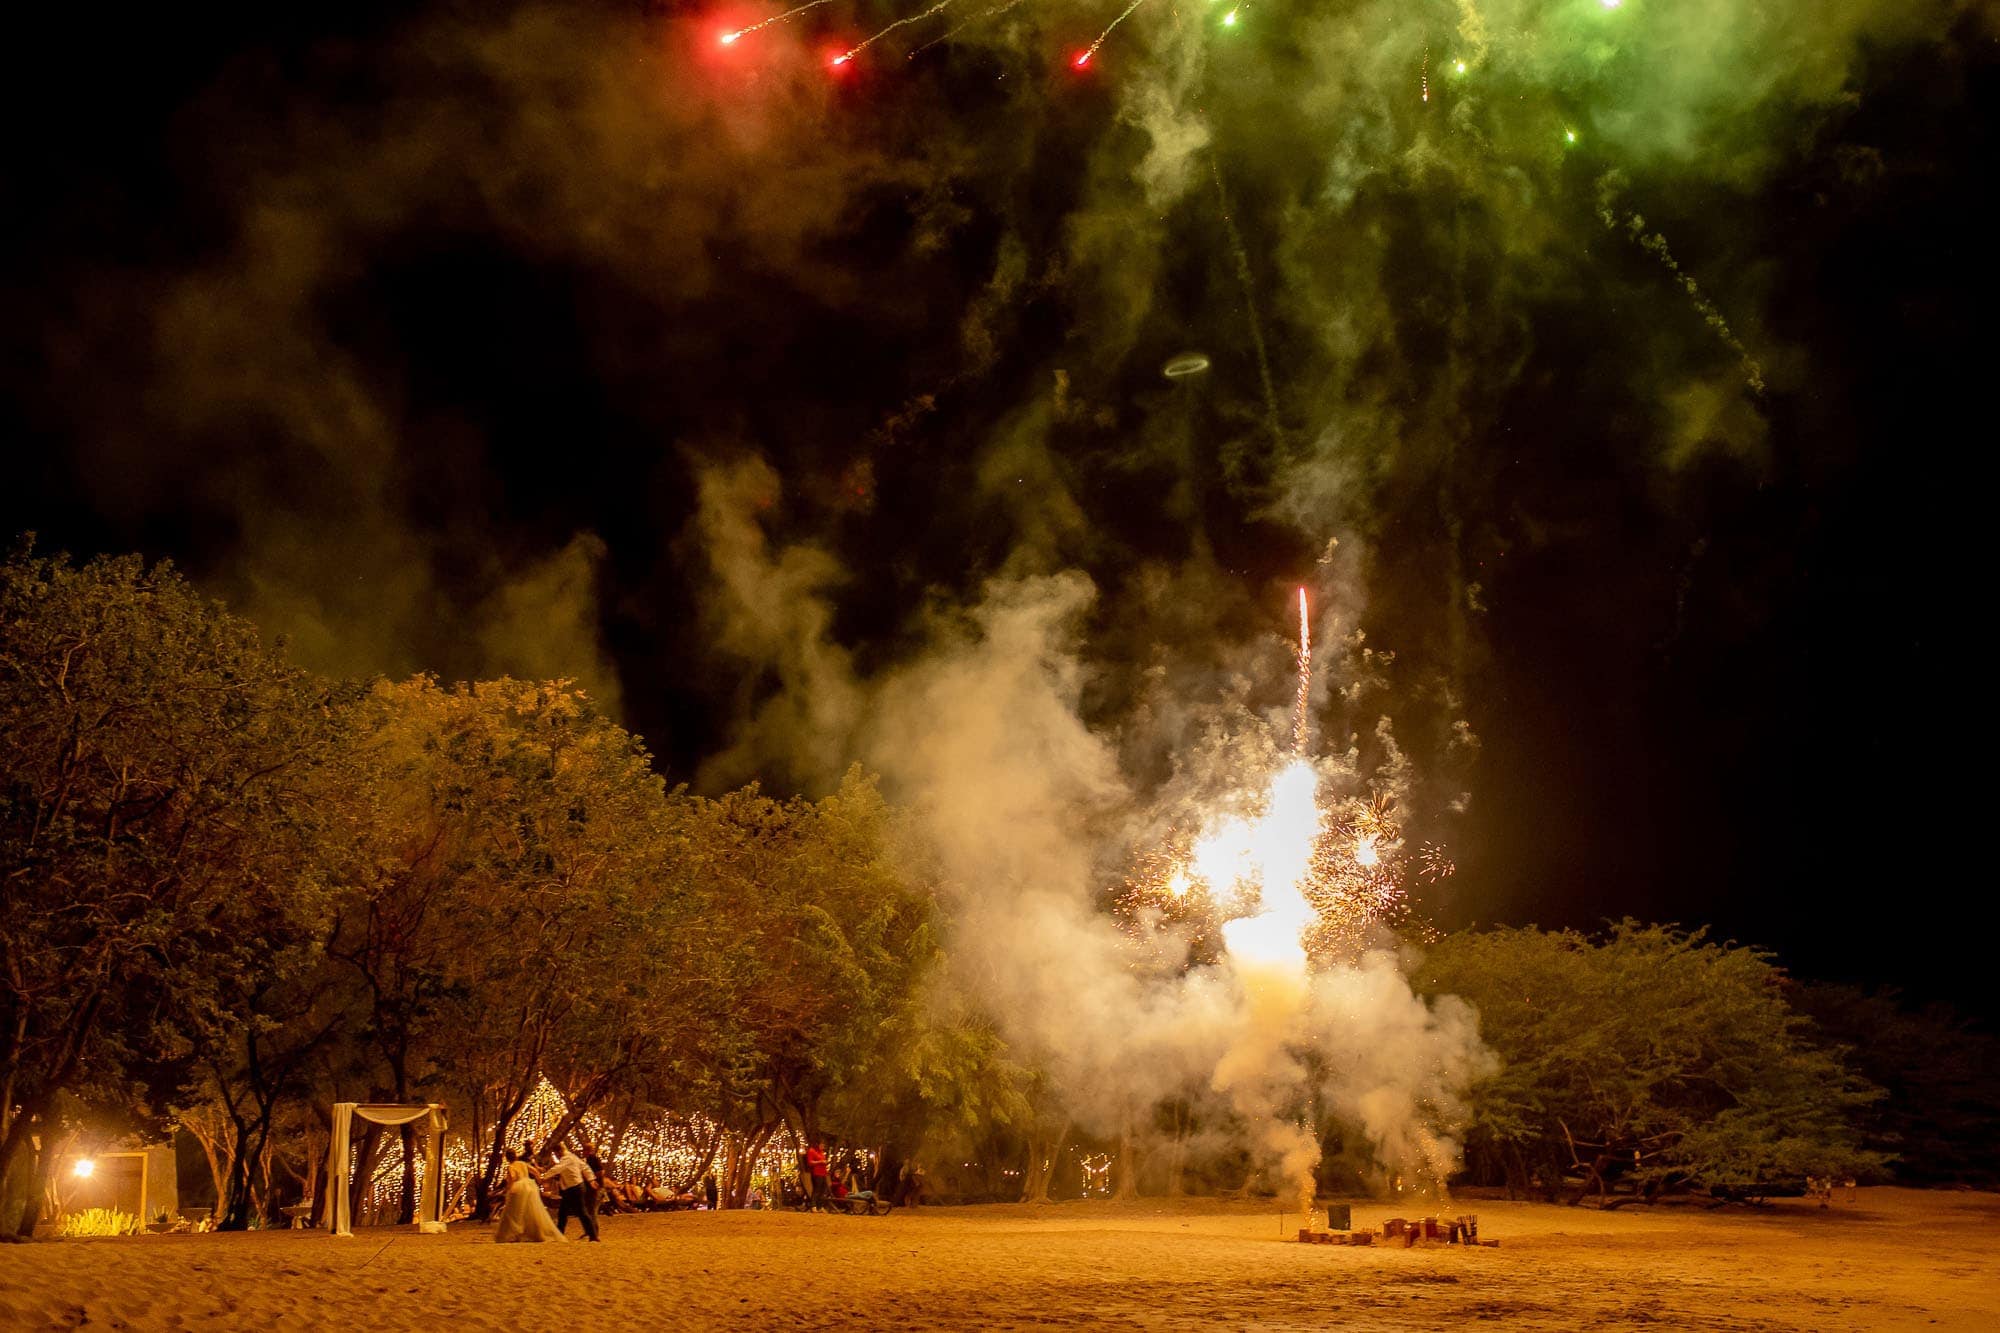 fireworks show to delight at a dream wedding